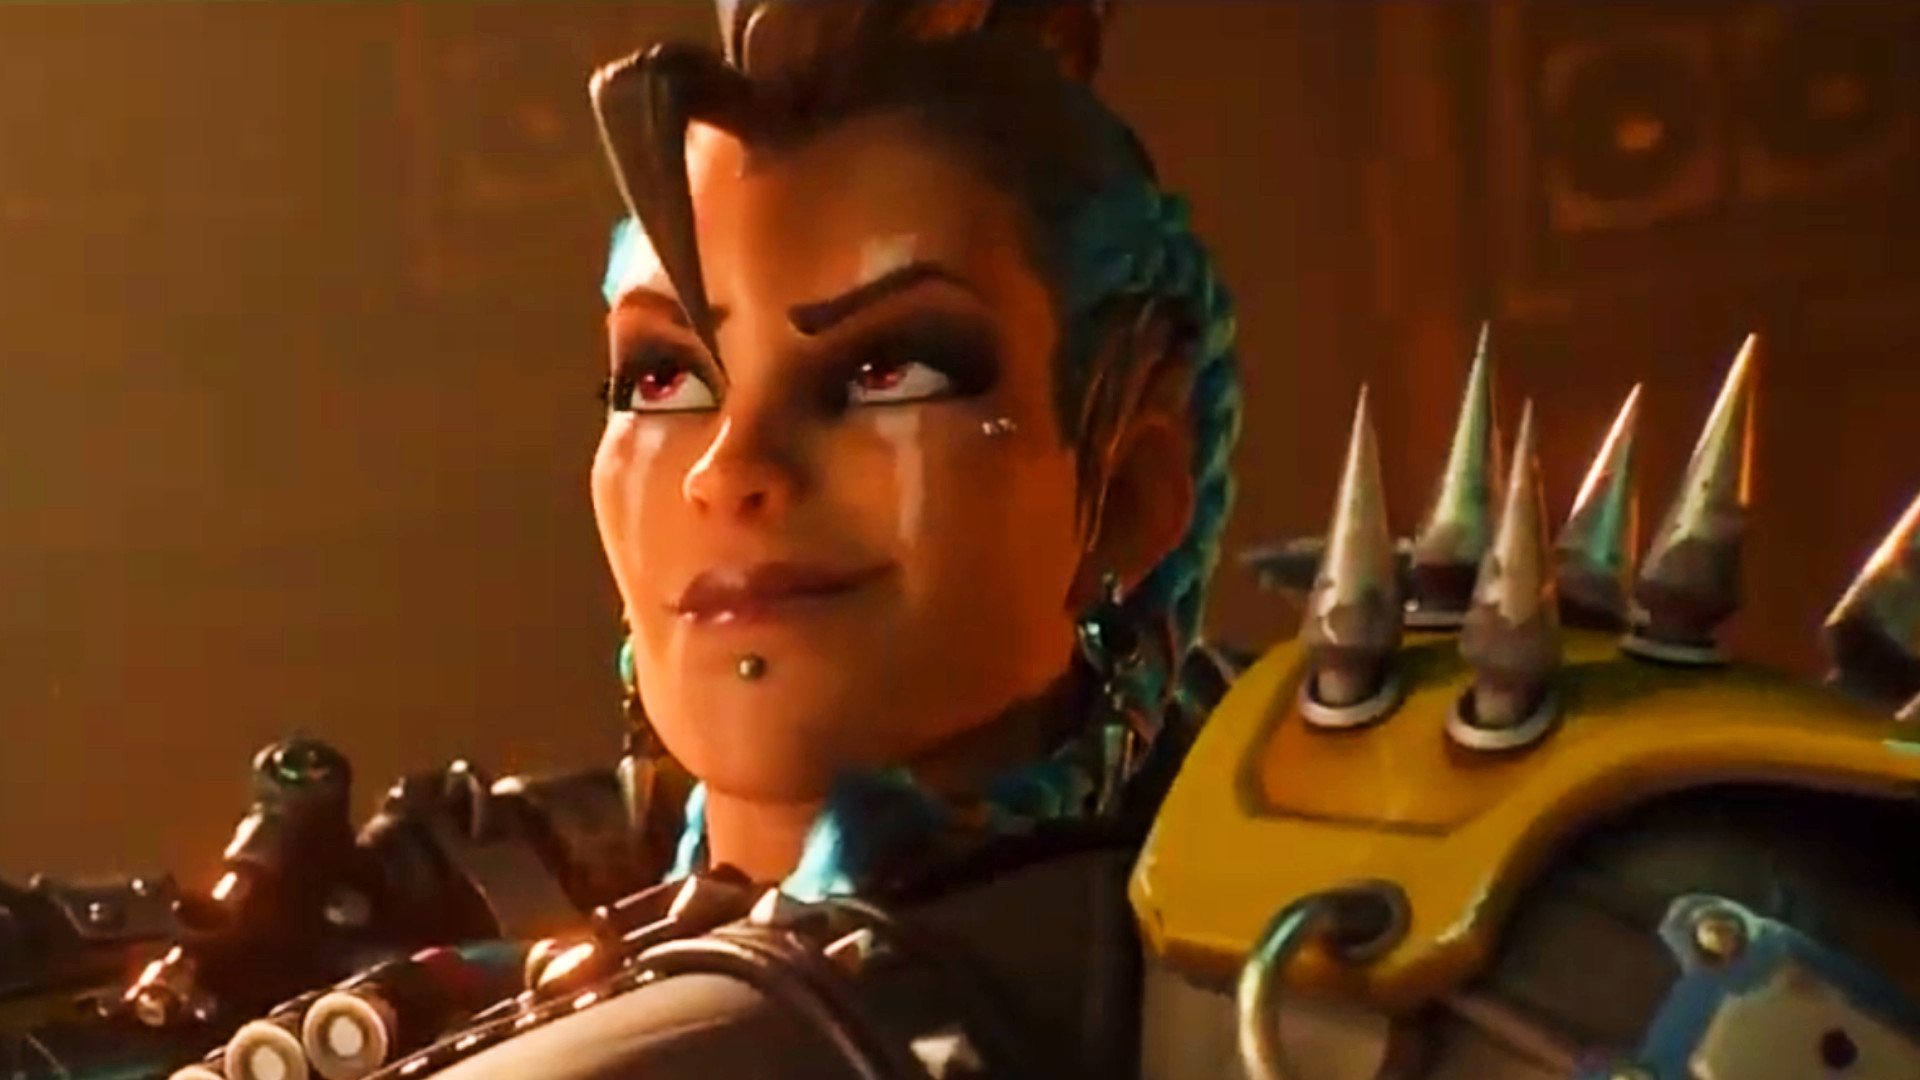 Overwatch 2 free-to-play, release date and new hero announced